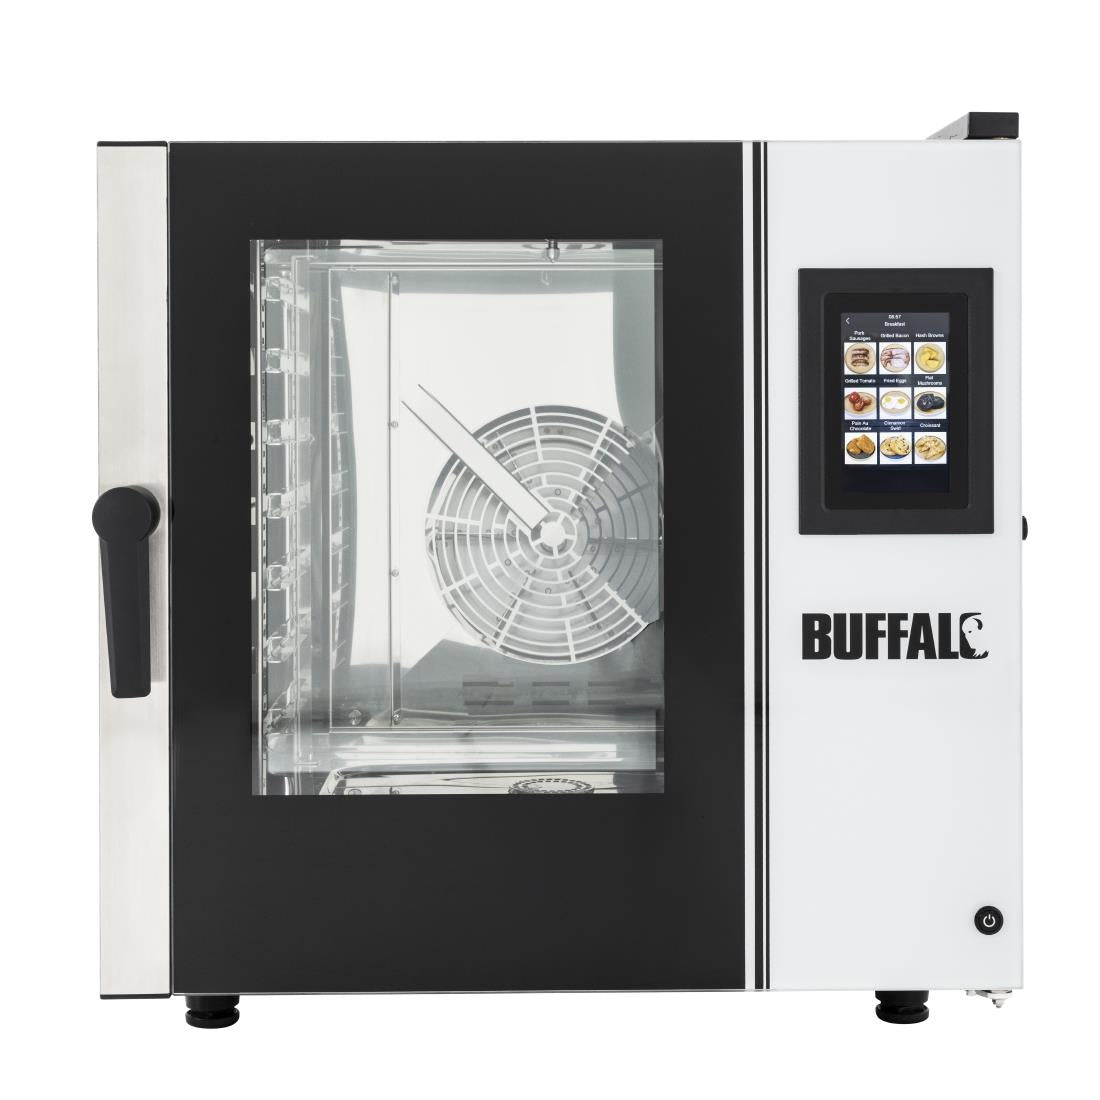 SA770 Buffalo Freestanding Smart Touchscreen Combi Oven 7 x GN 1/1 with Installation Kit